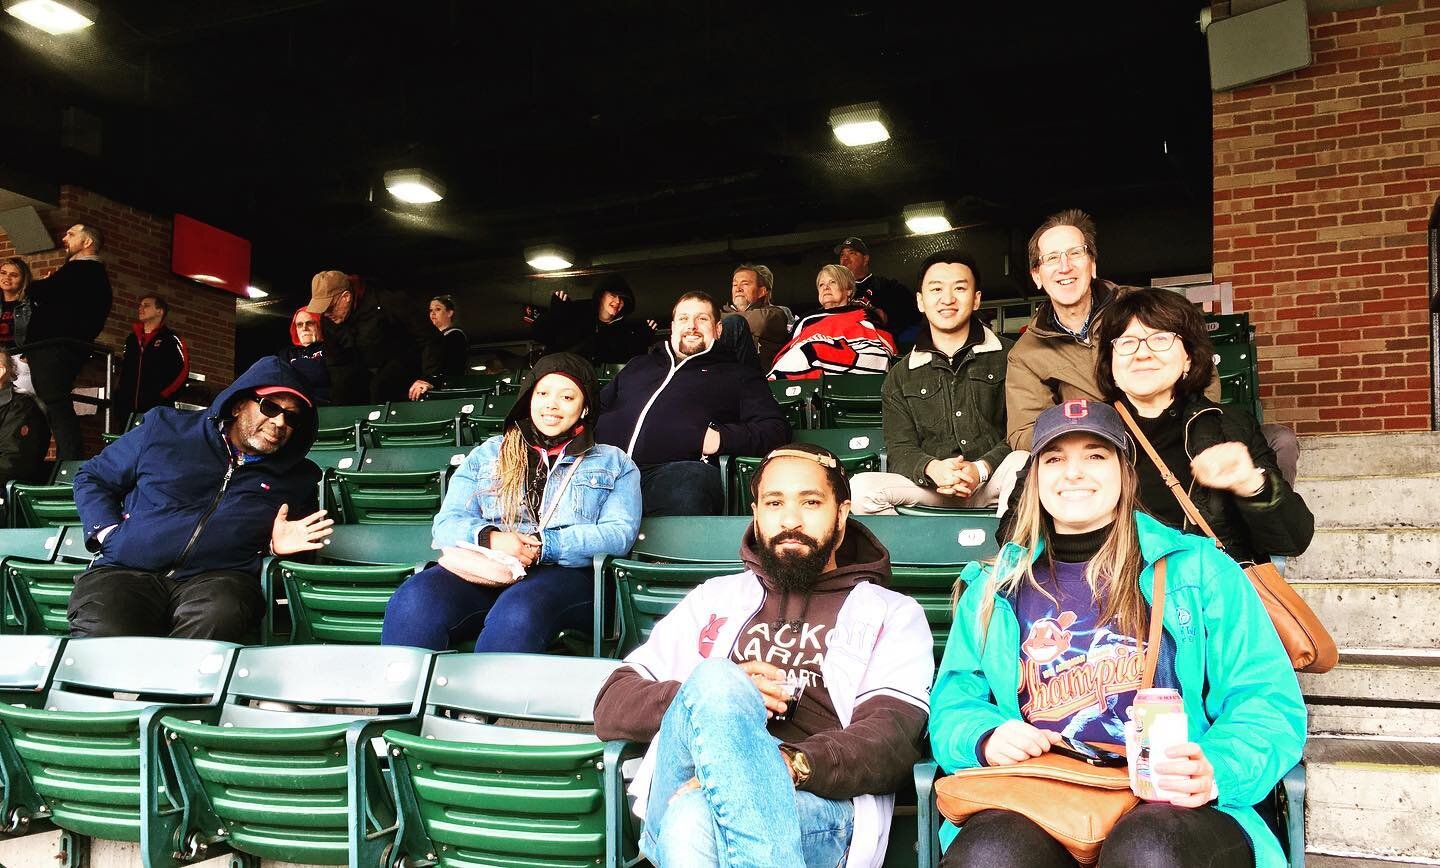 Office Outings! It was cold 🥶 but we still had a blast! #guardians #progressivefield #fun #architecture #downtowncleveland